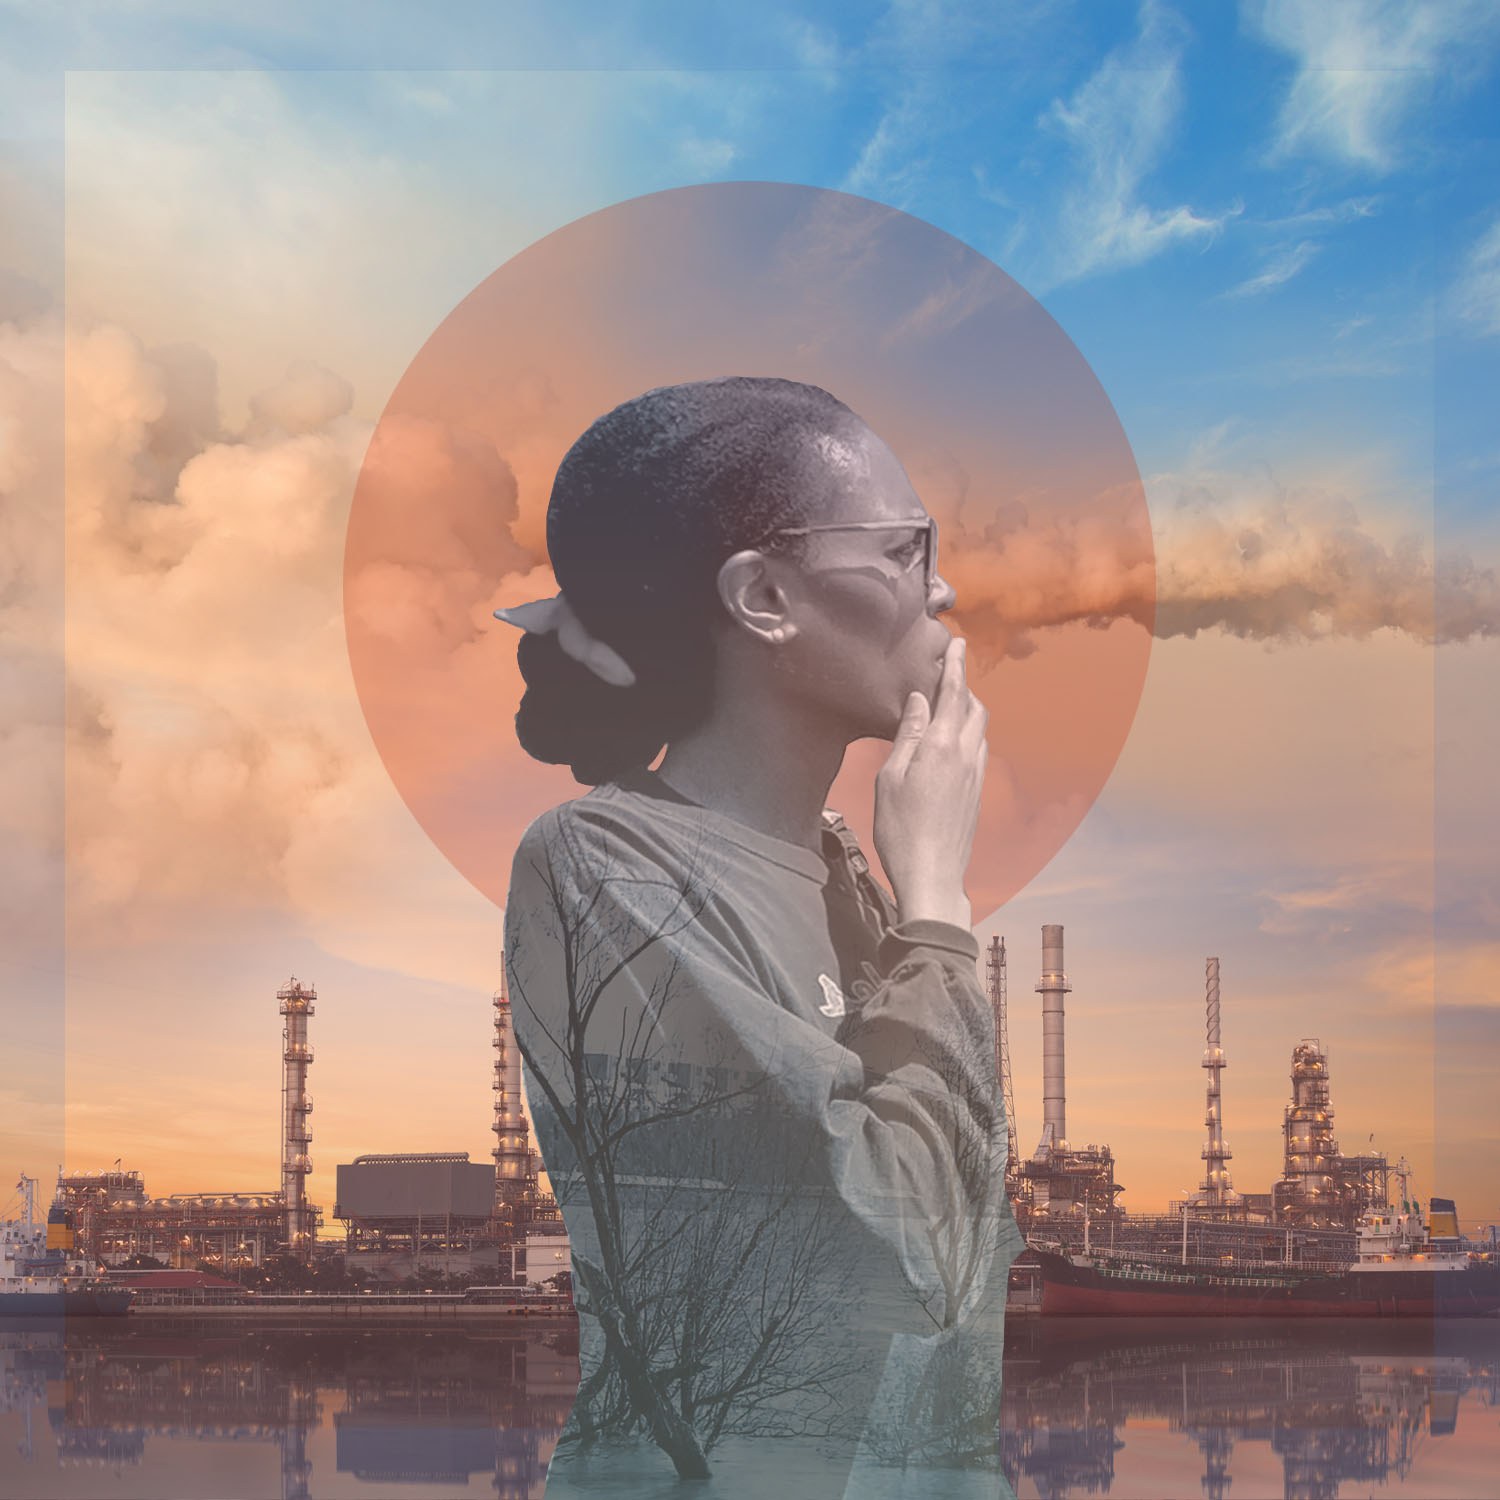 Digital poster in collage style, showing a woman looking off frame to the right, with a background showing smog above and a petrochemical facility below.